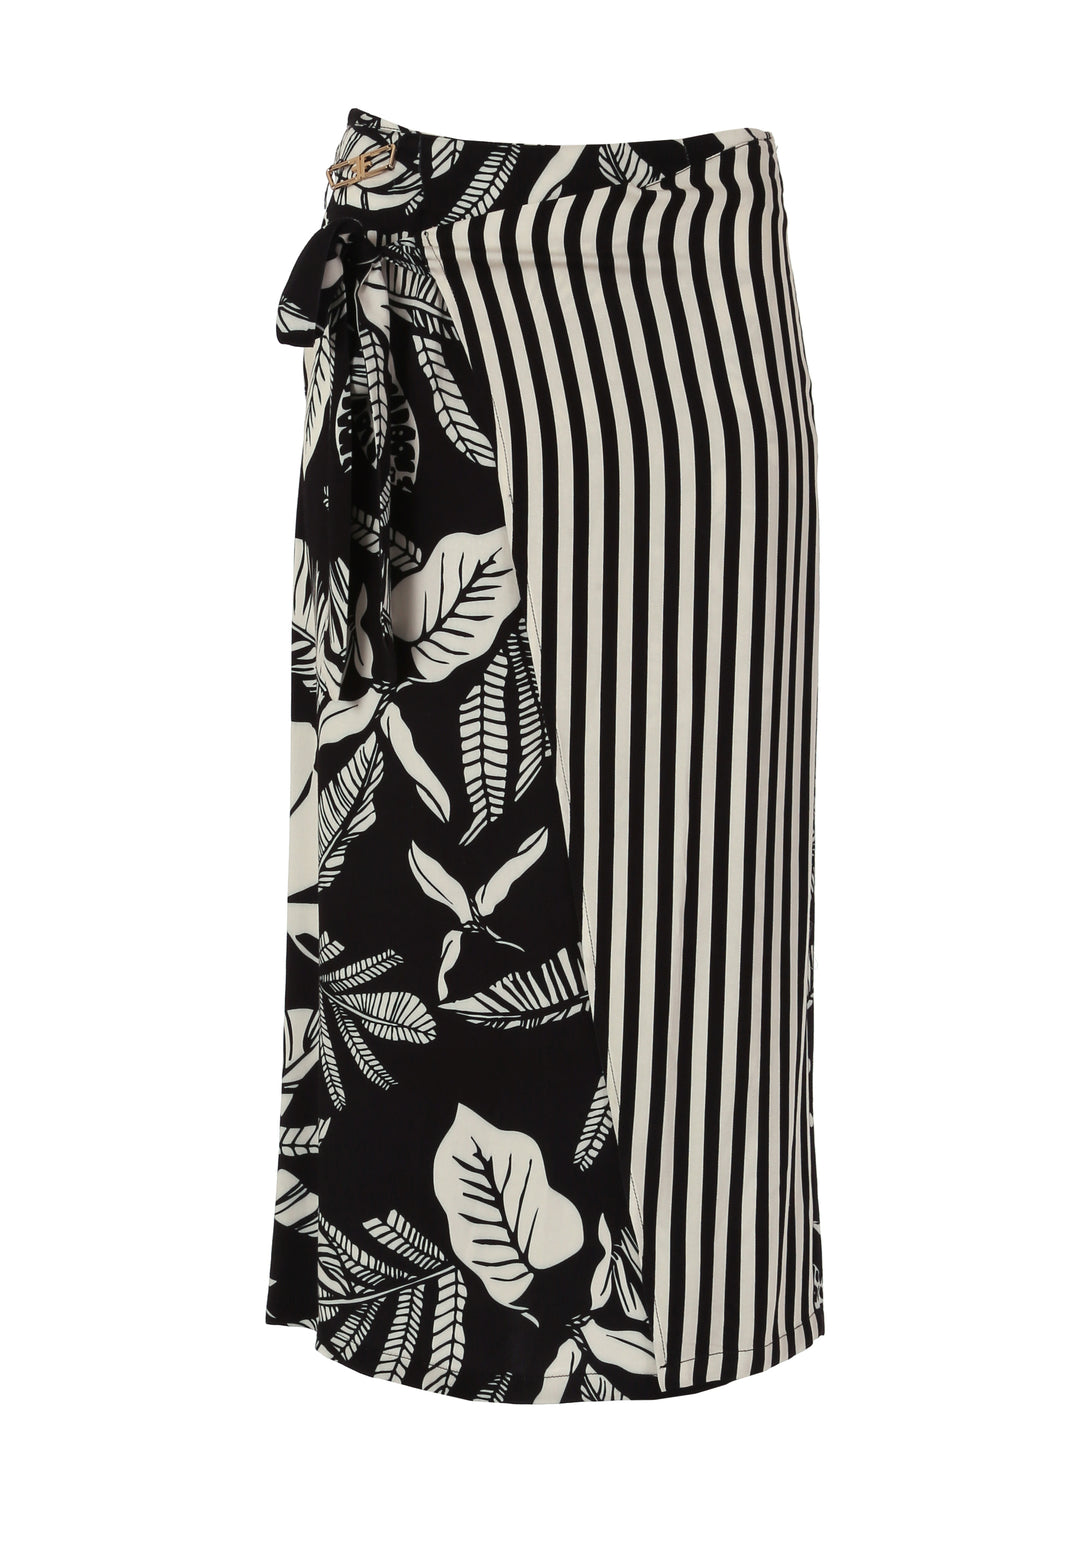 Skirt regular fit, middle length, striped and with flowery  pattern